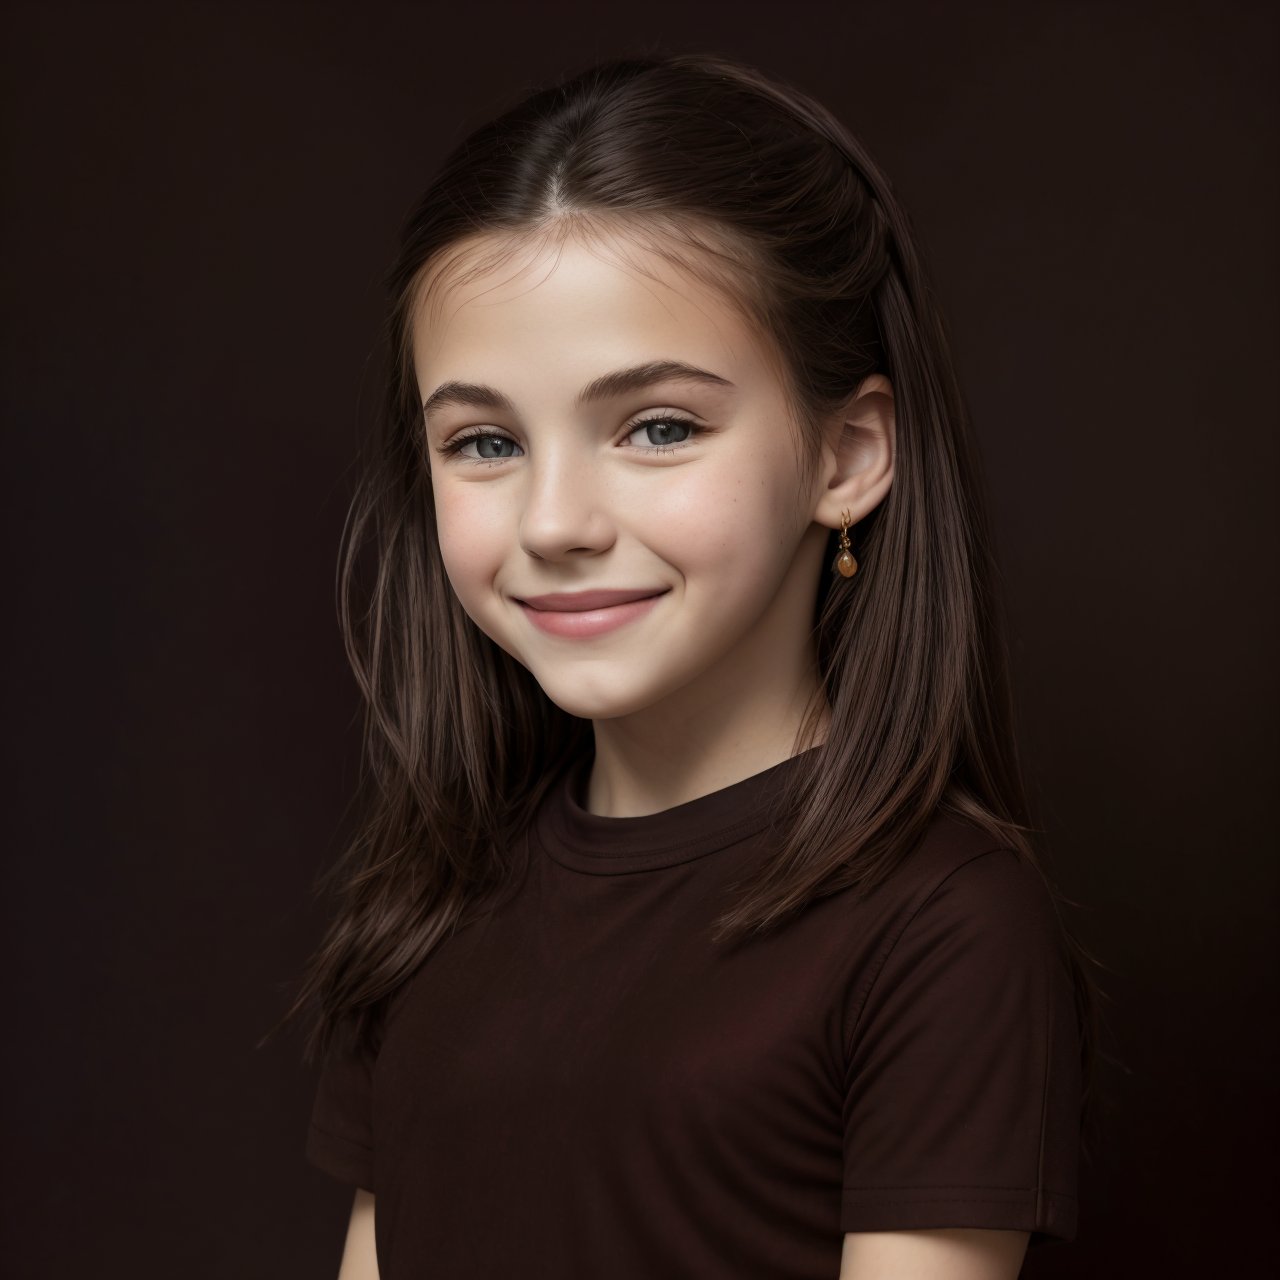 (masterpiece:1.3), best quality, profile of smiling (AIDA_LoRA_arusso:1.14) <lora:AIDA_LoRA_arusso:0.72> in a red shirt posing in front of (deep brown background:1.5), little girl, pretty face, naughty, funny, happy, playful, intimate, cinematic, studio photo, studio photo, kkw-ph1, hdr, f1.6, getty images, (colorful:1.1)